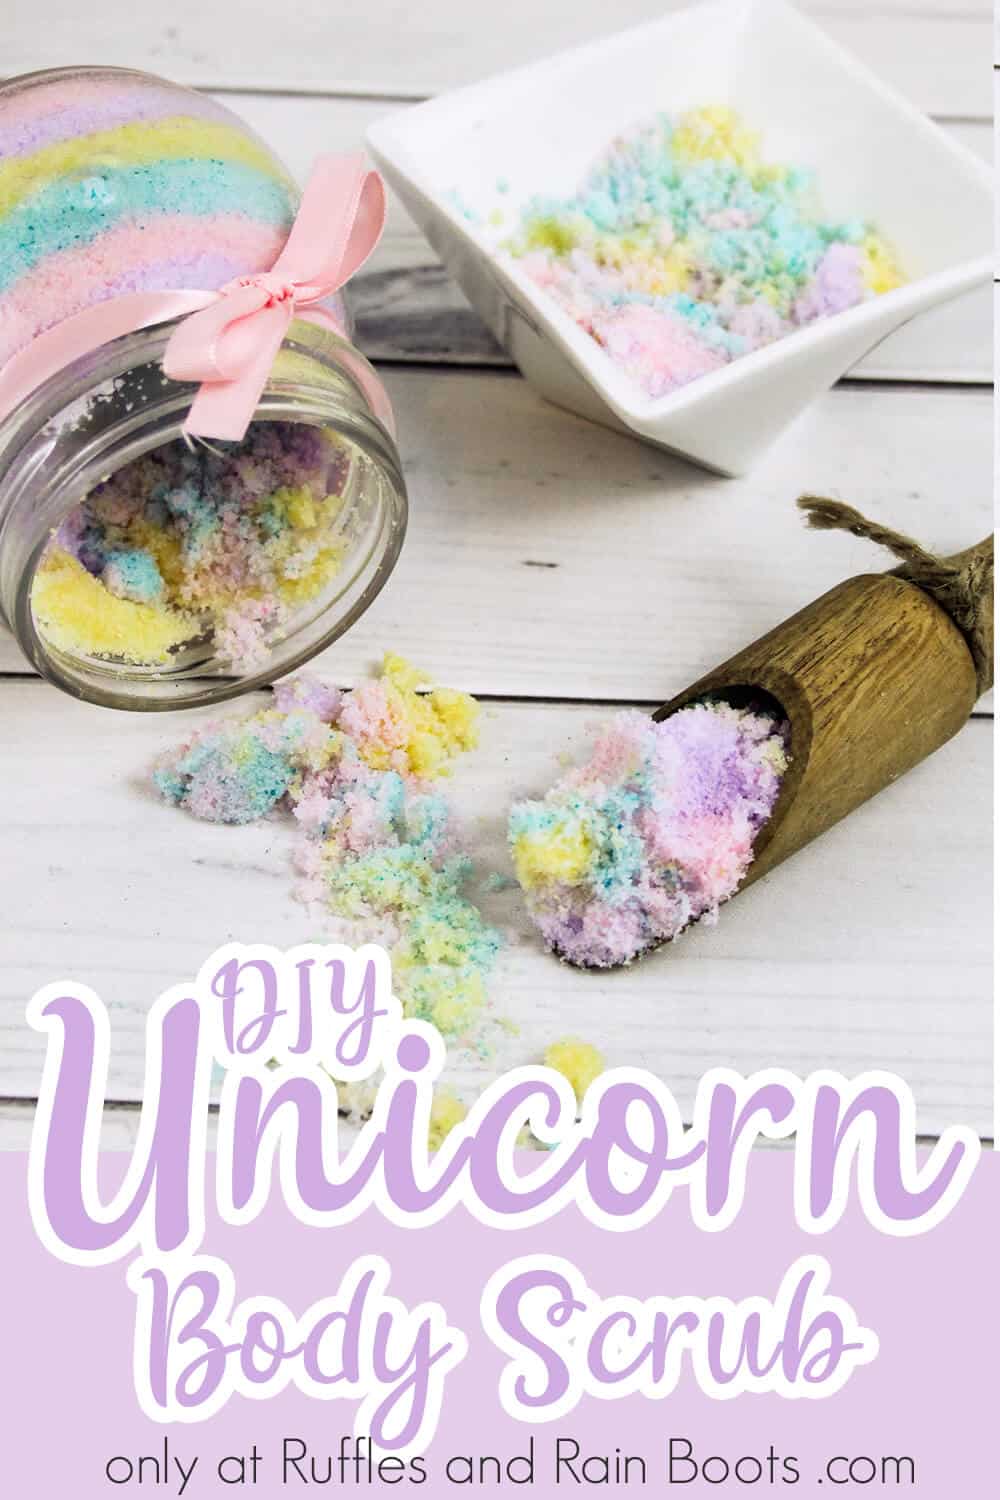 close-up of spilled jar and scoop of diy sugar scrub with text which reads diy unicorn body scrub